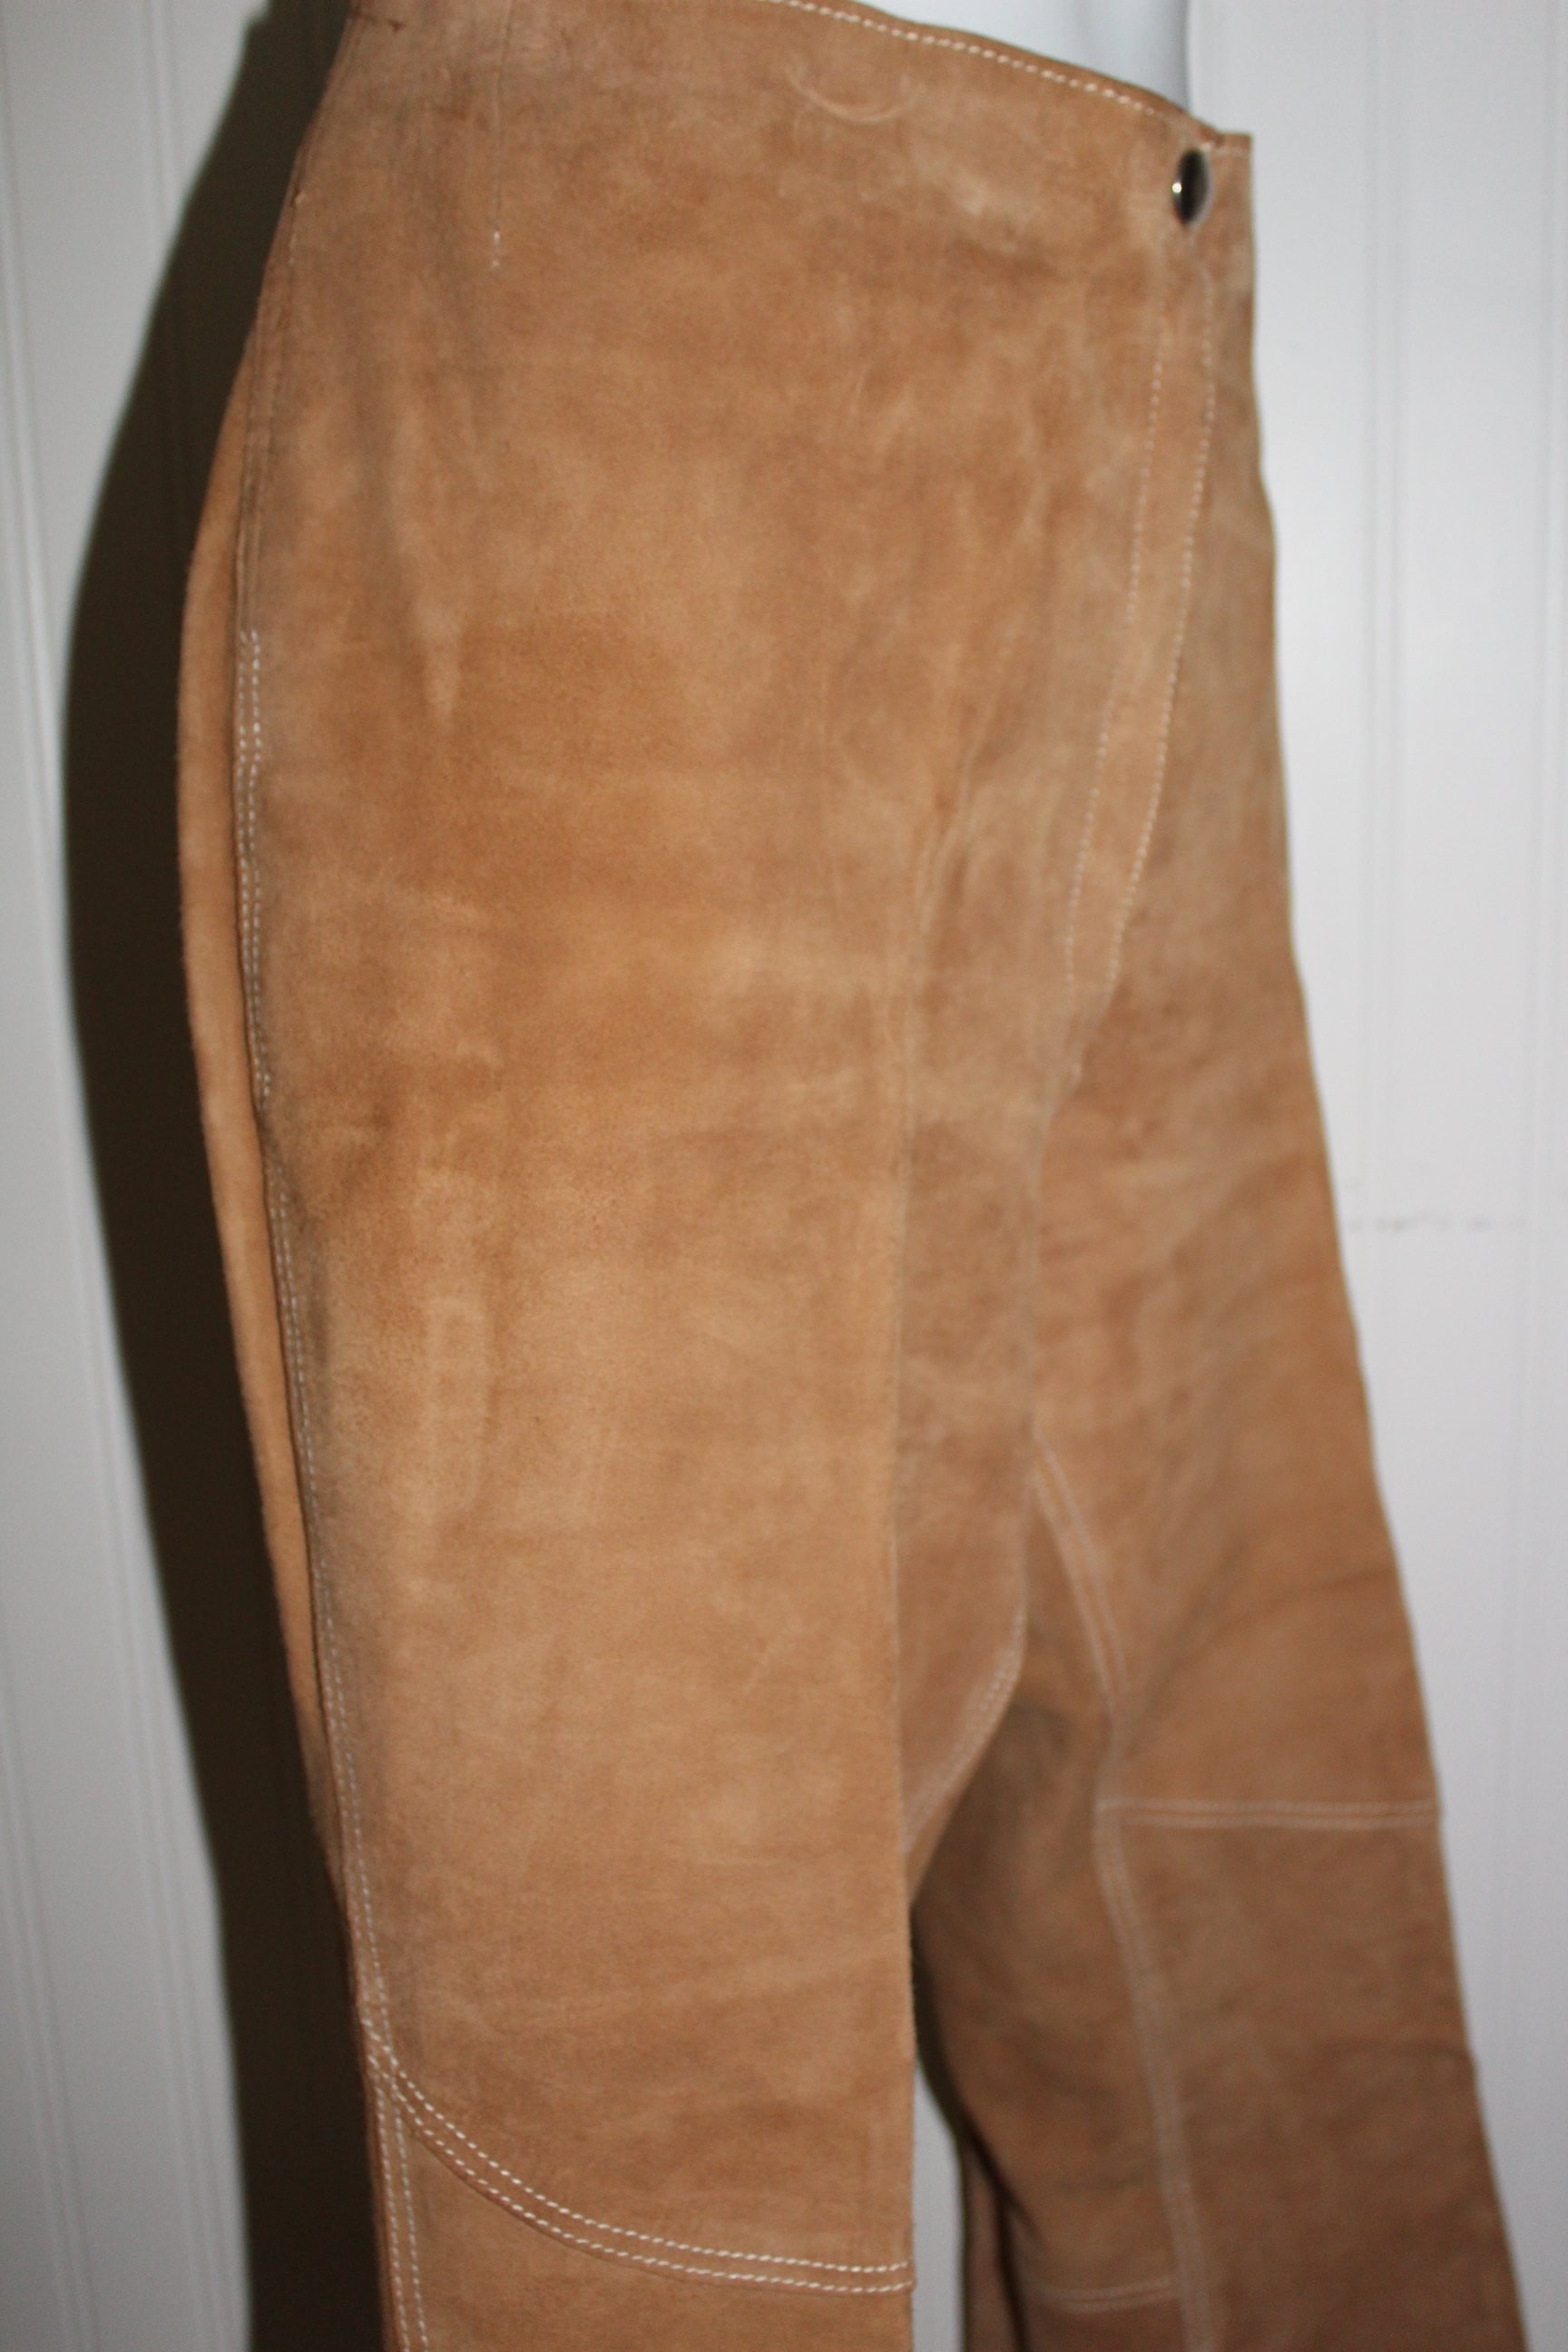 Vintage Leather Pants Laced Flare Leg Caramel Cream Top Stitch Great Detail boot leg